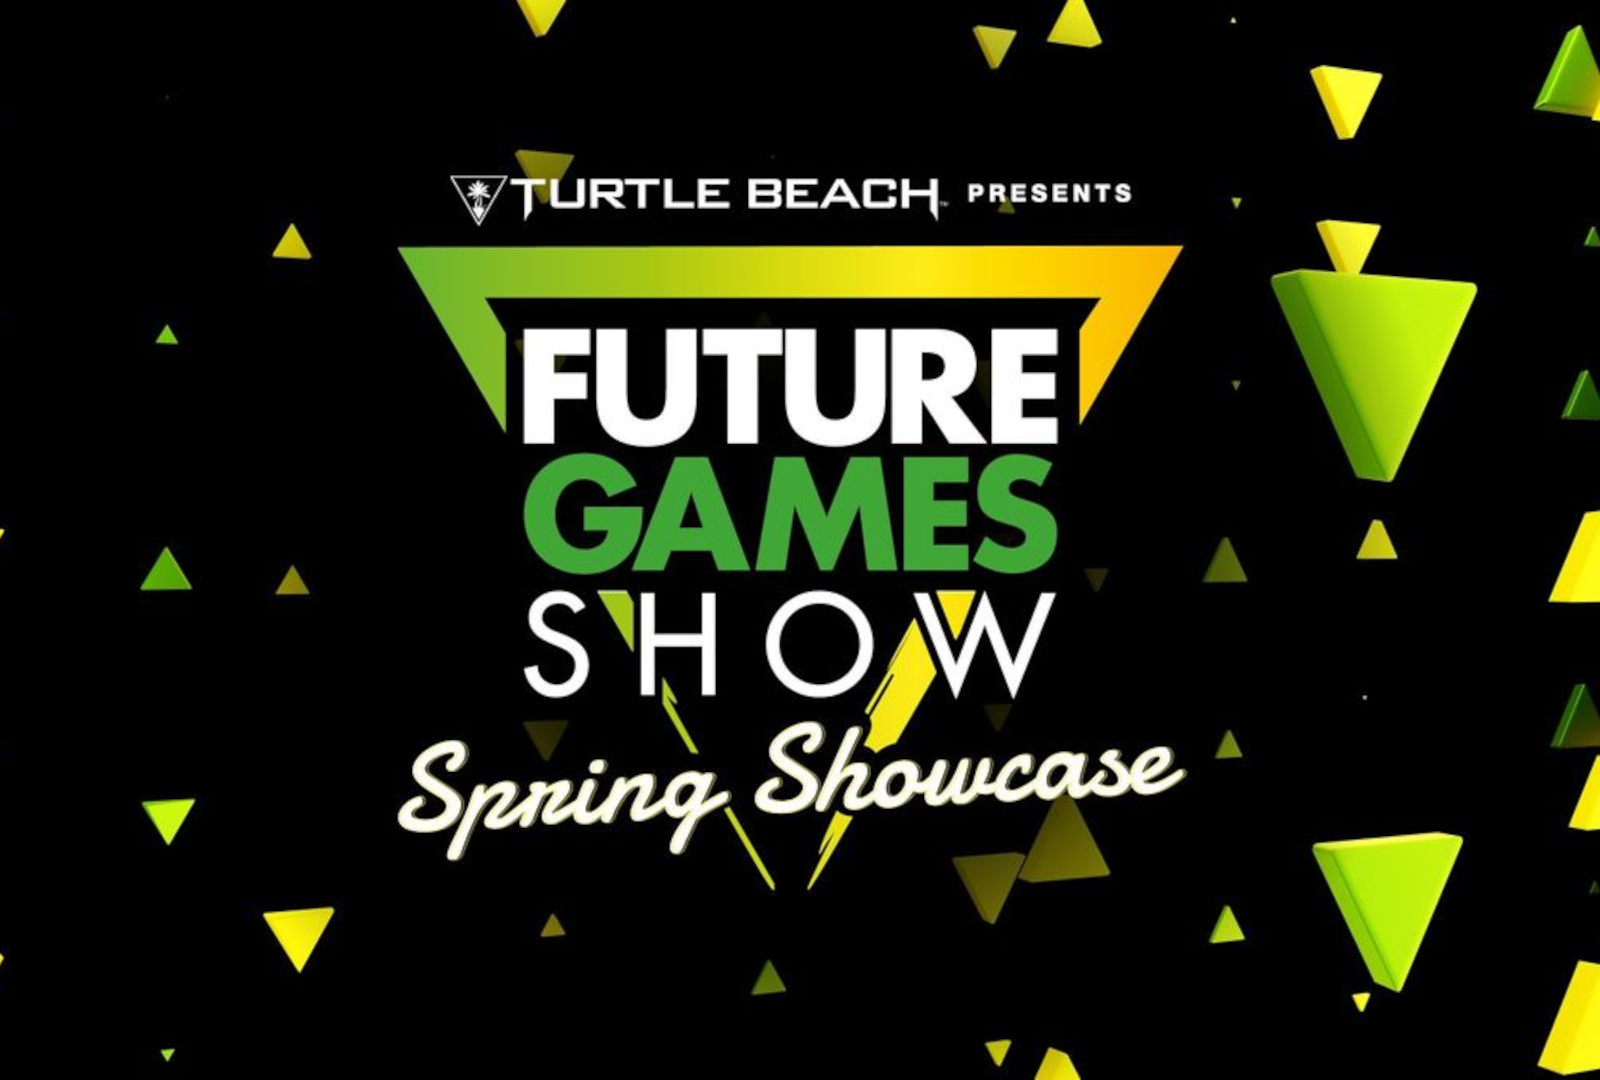 Two Sumo Digital games to appear during Future Games Show Spring Showcase